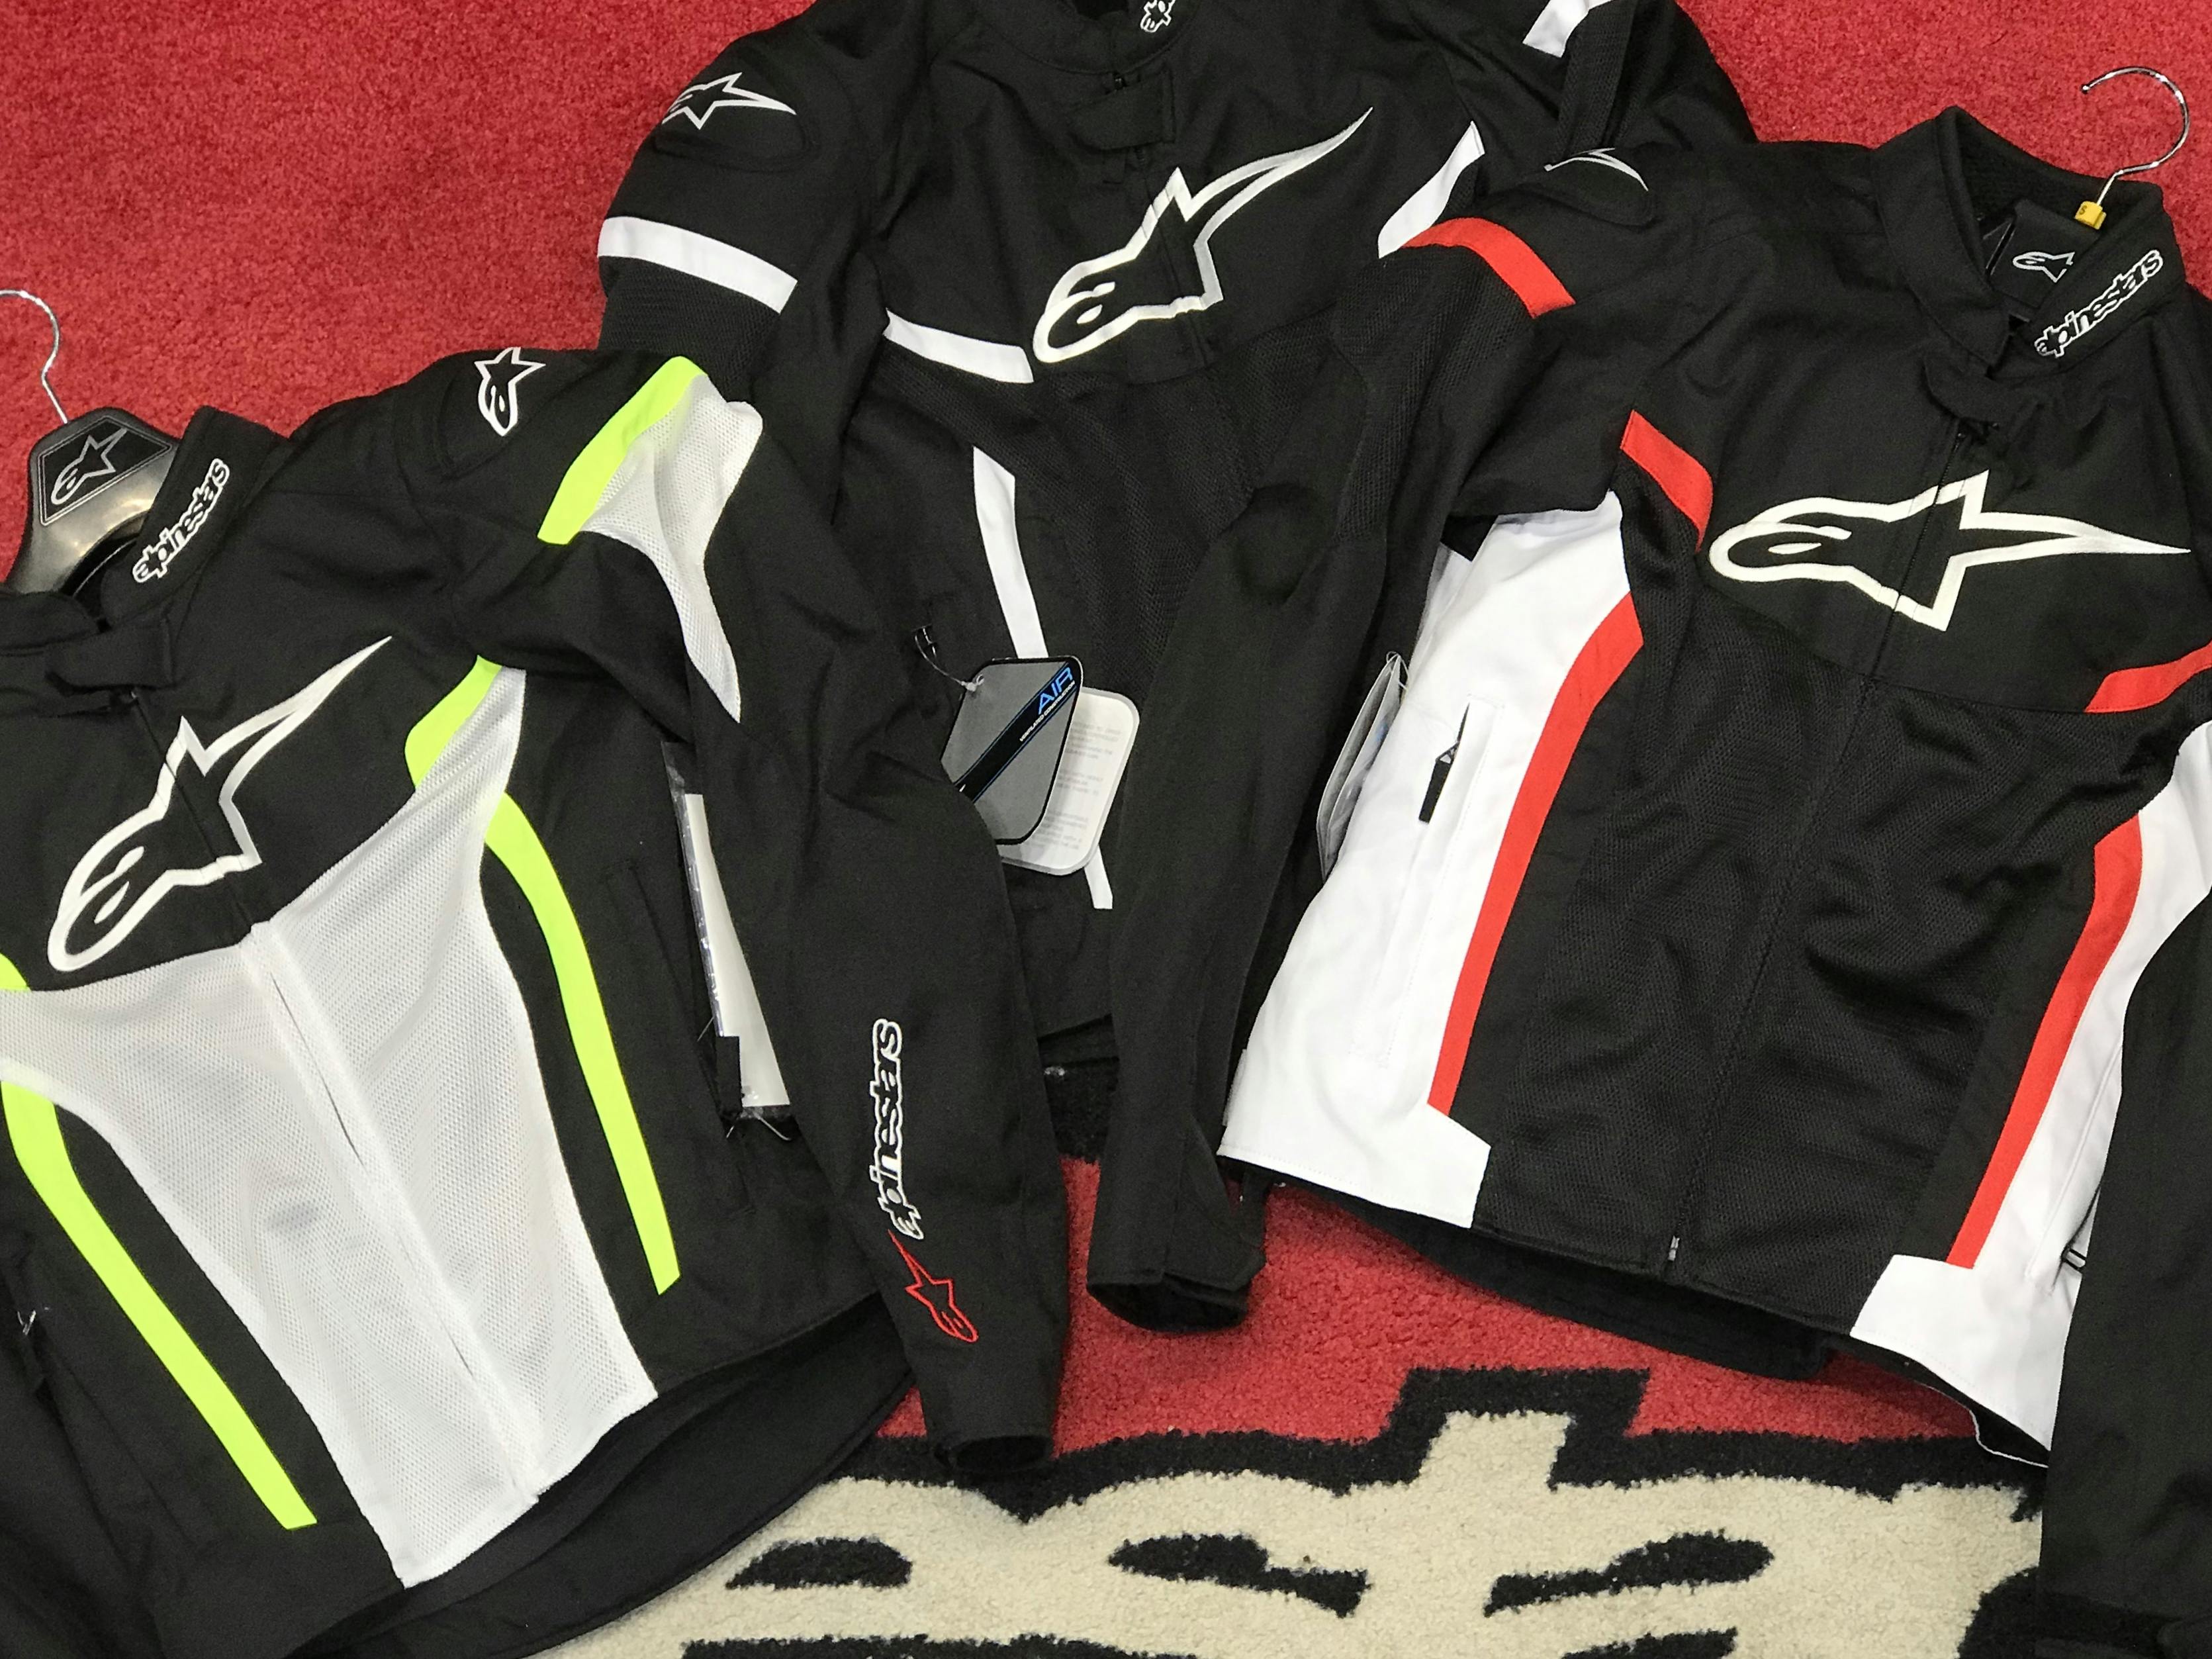 T-GP Air V2 Jackets in store at Bikebiz in 3 different colours